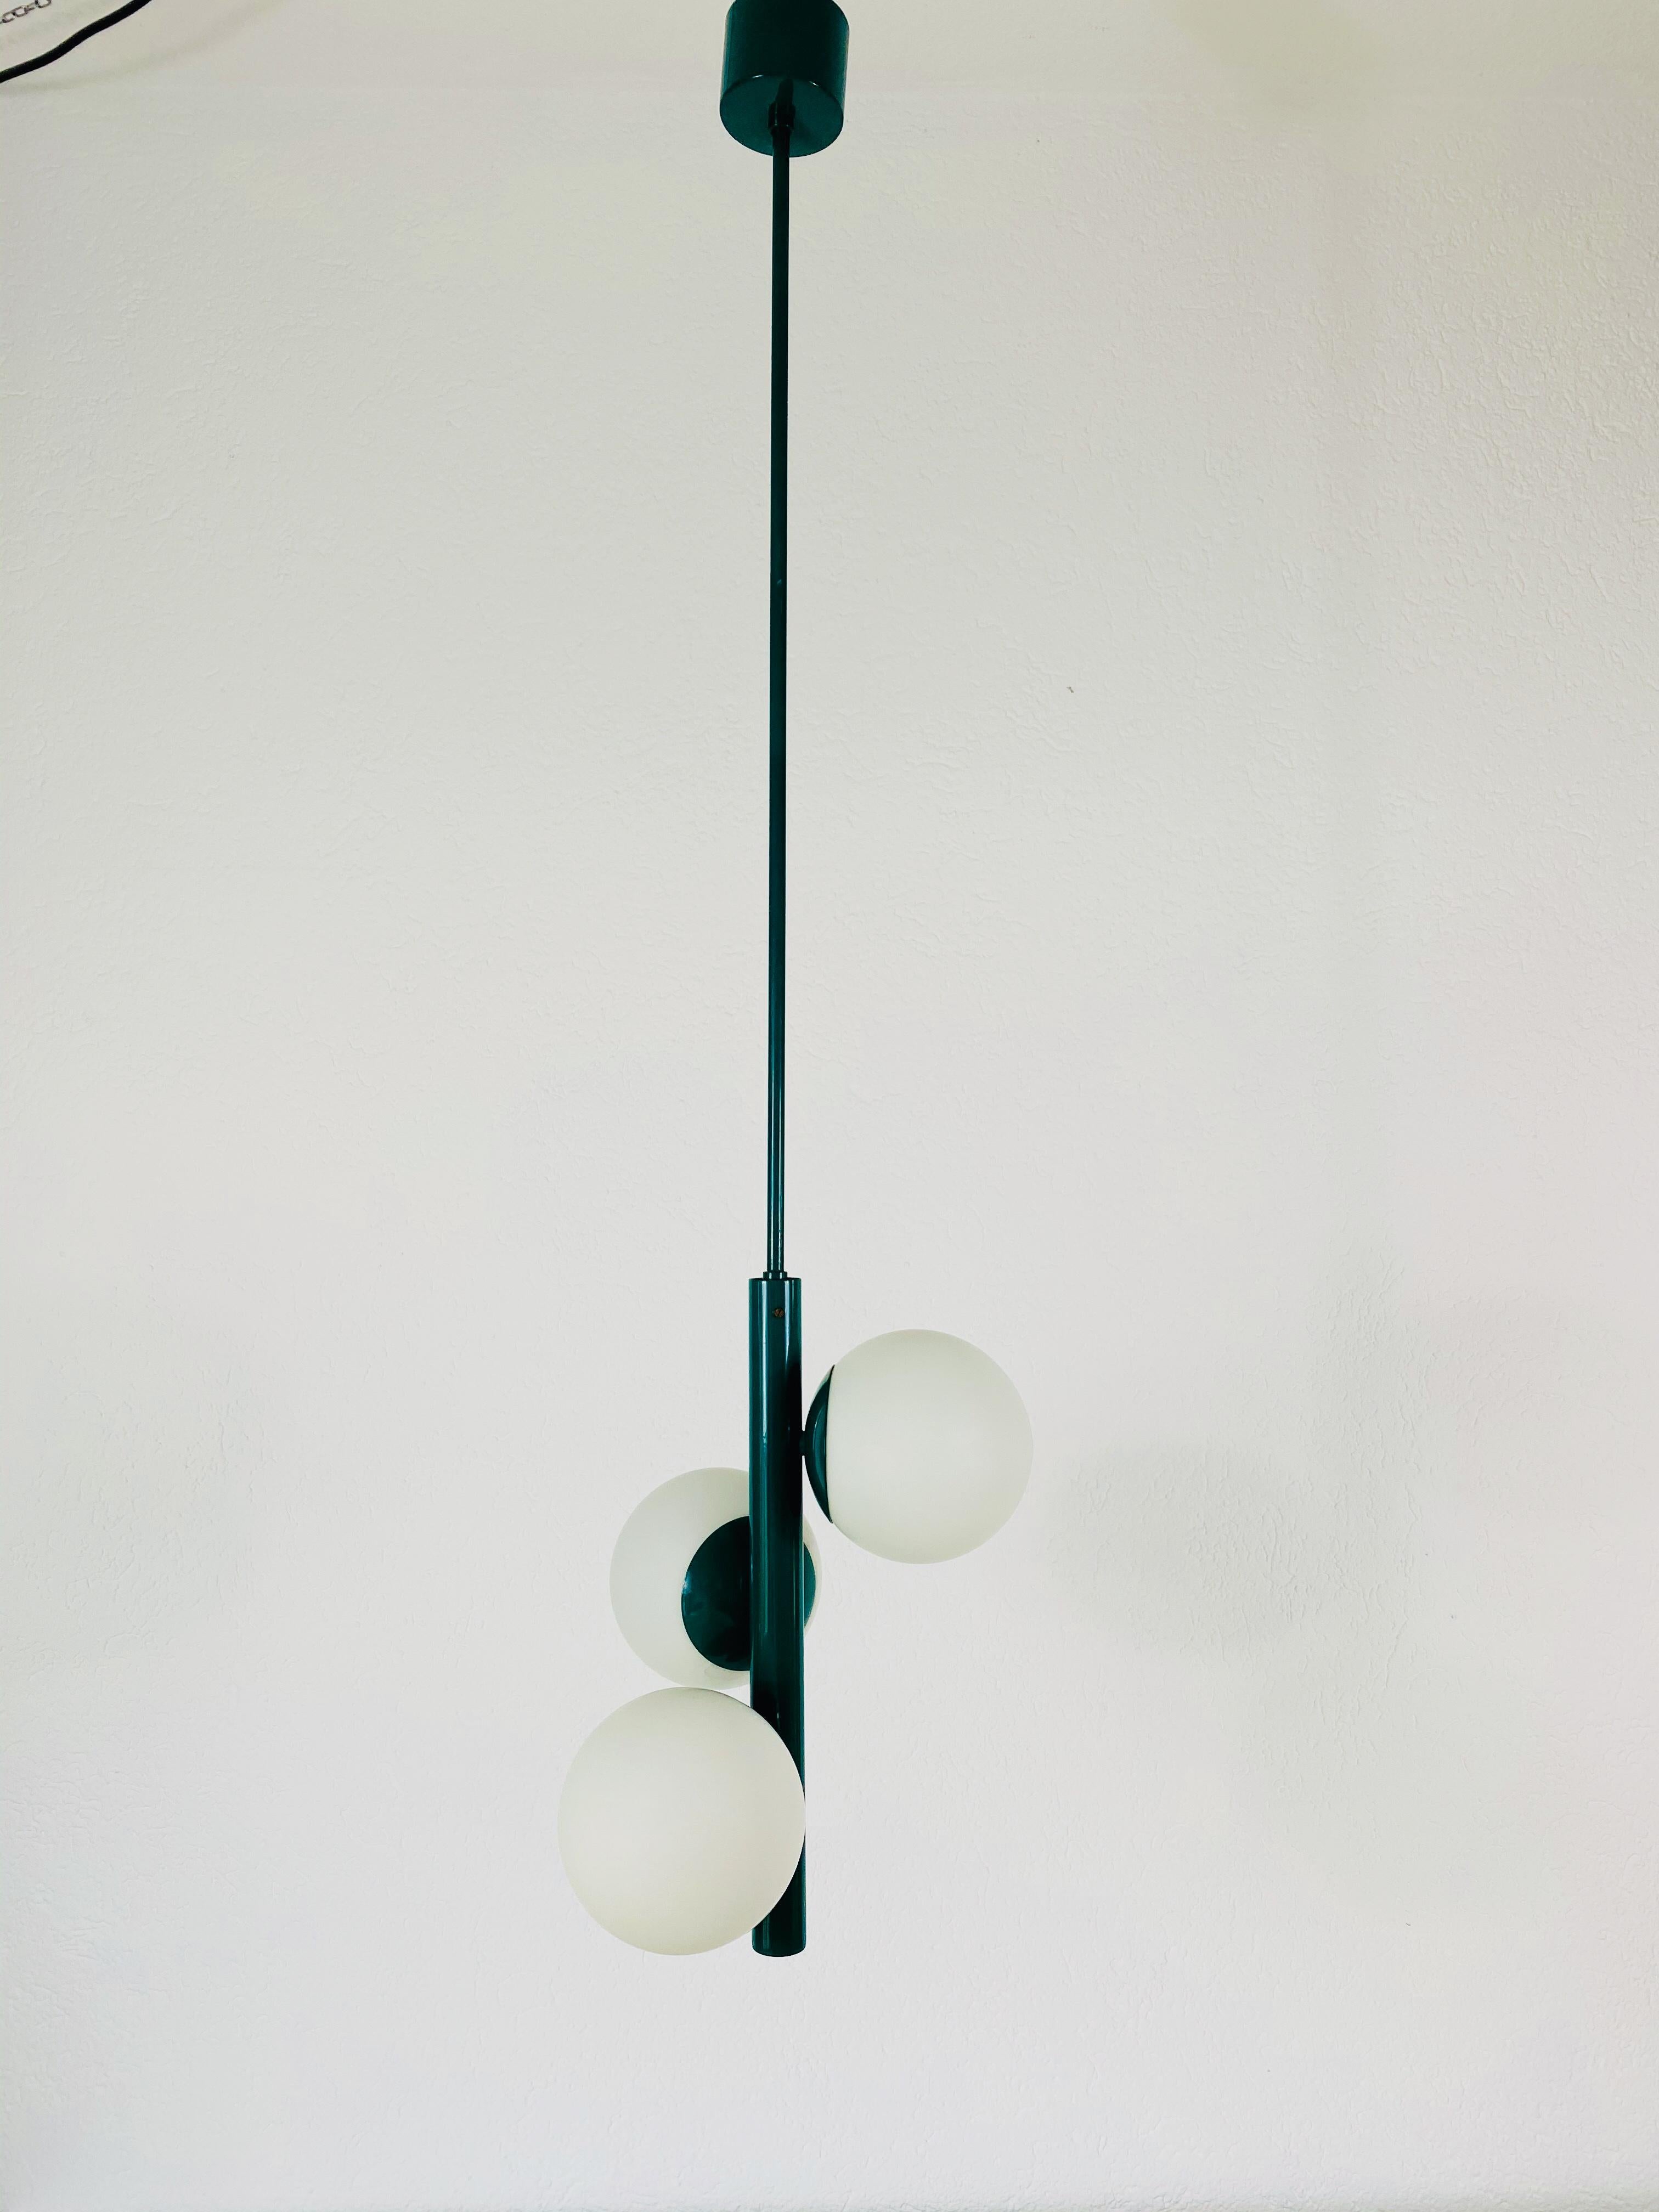 A midcentury chandelier by Kaiser made in Germany in the 1960s. It is fascinating with its Space Age design and three opaque balls. The body of the light is made of full metal, including the arms.


The light requires three E14 light bulbs. Very